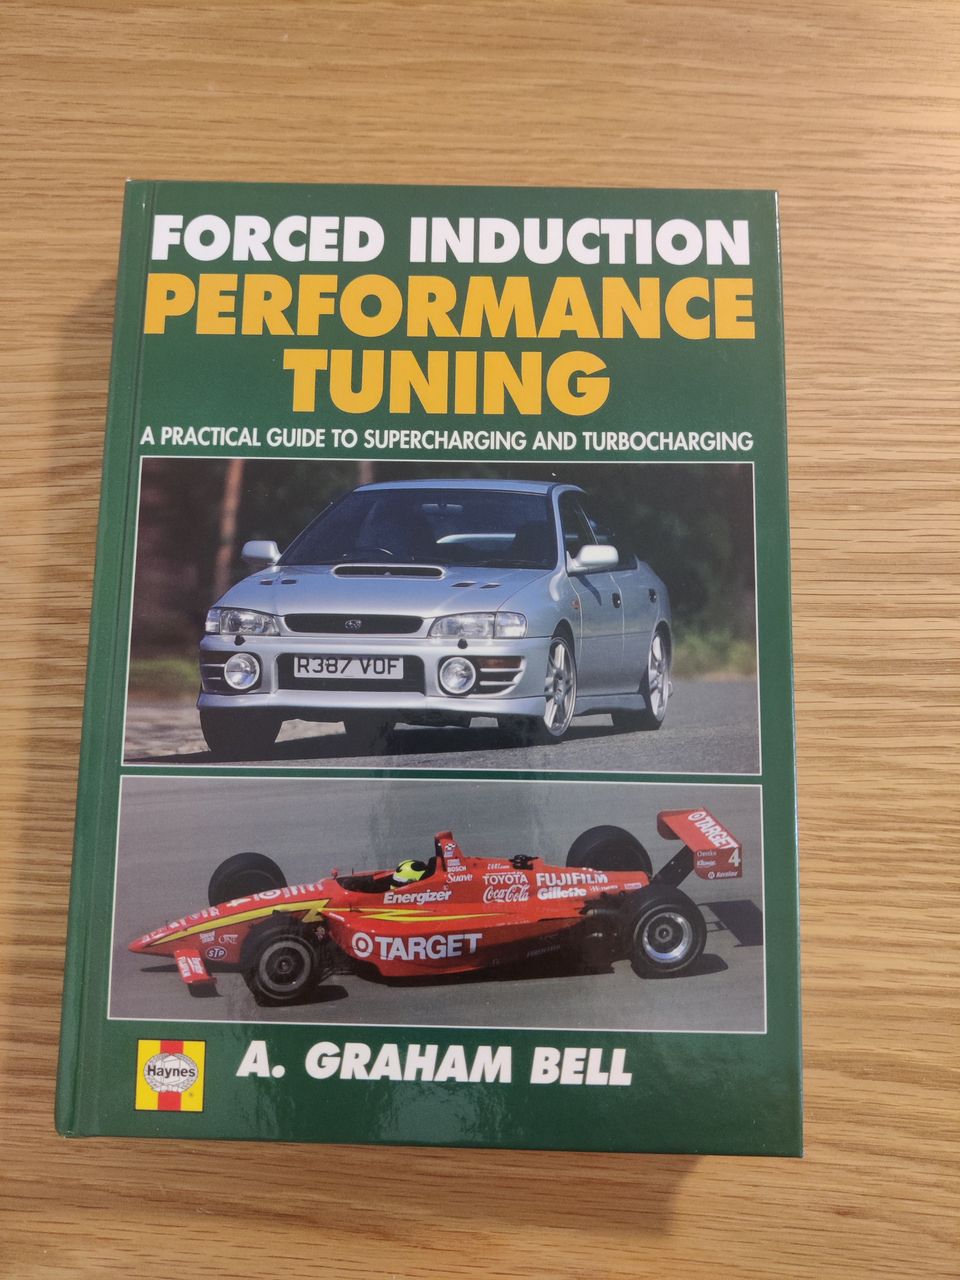 Forced Induction Performance Tuning